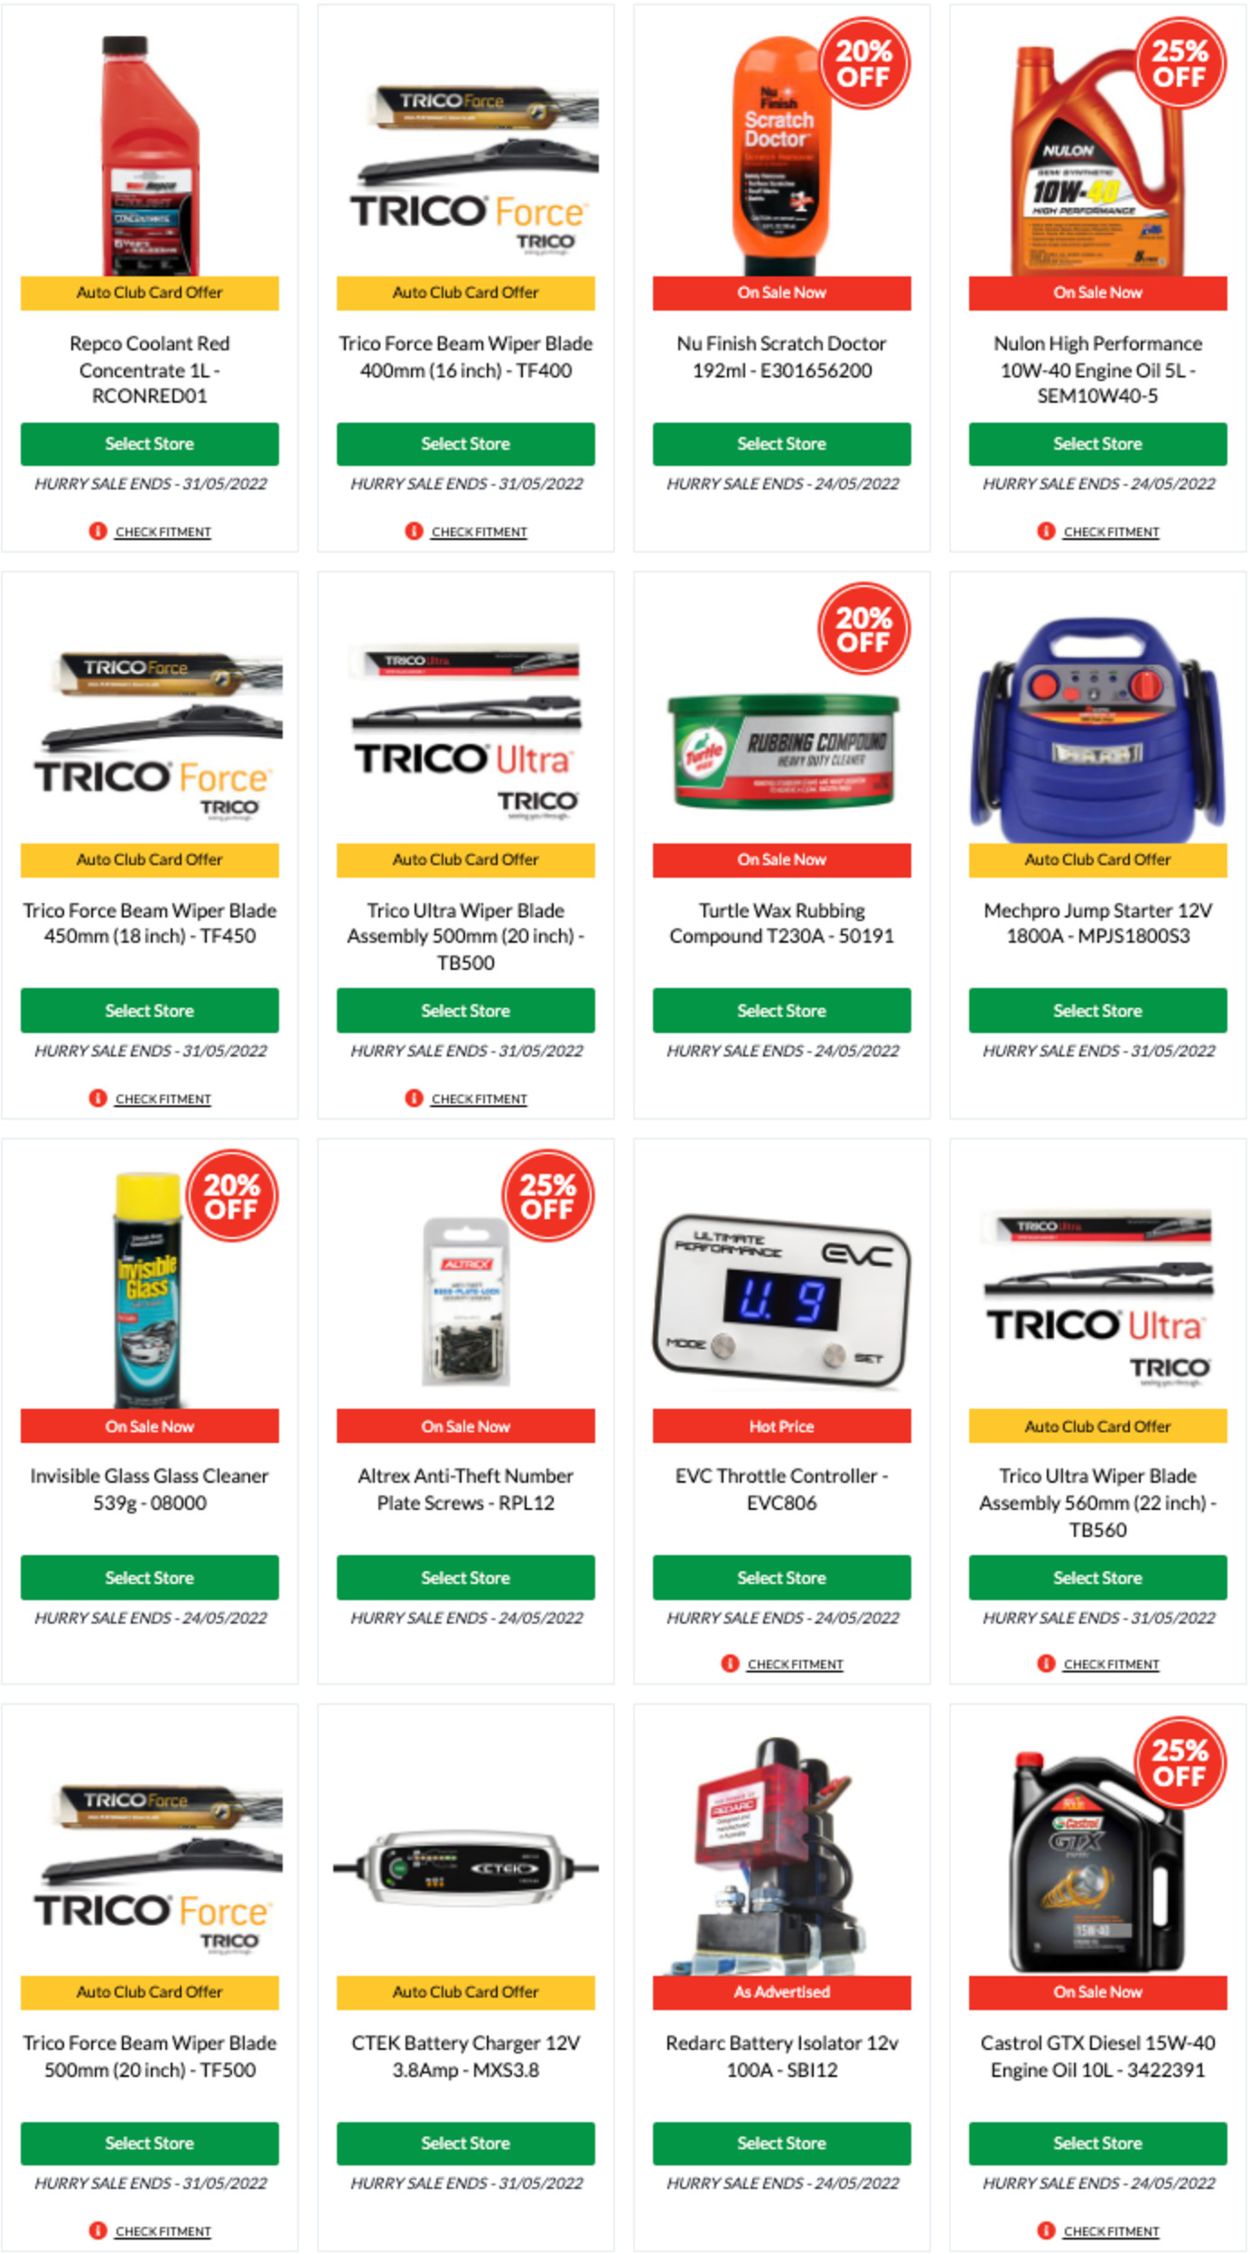 Repco Catalogue from 24/05/2022